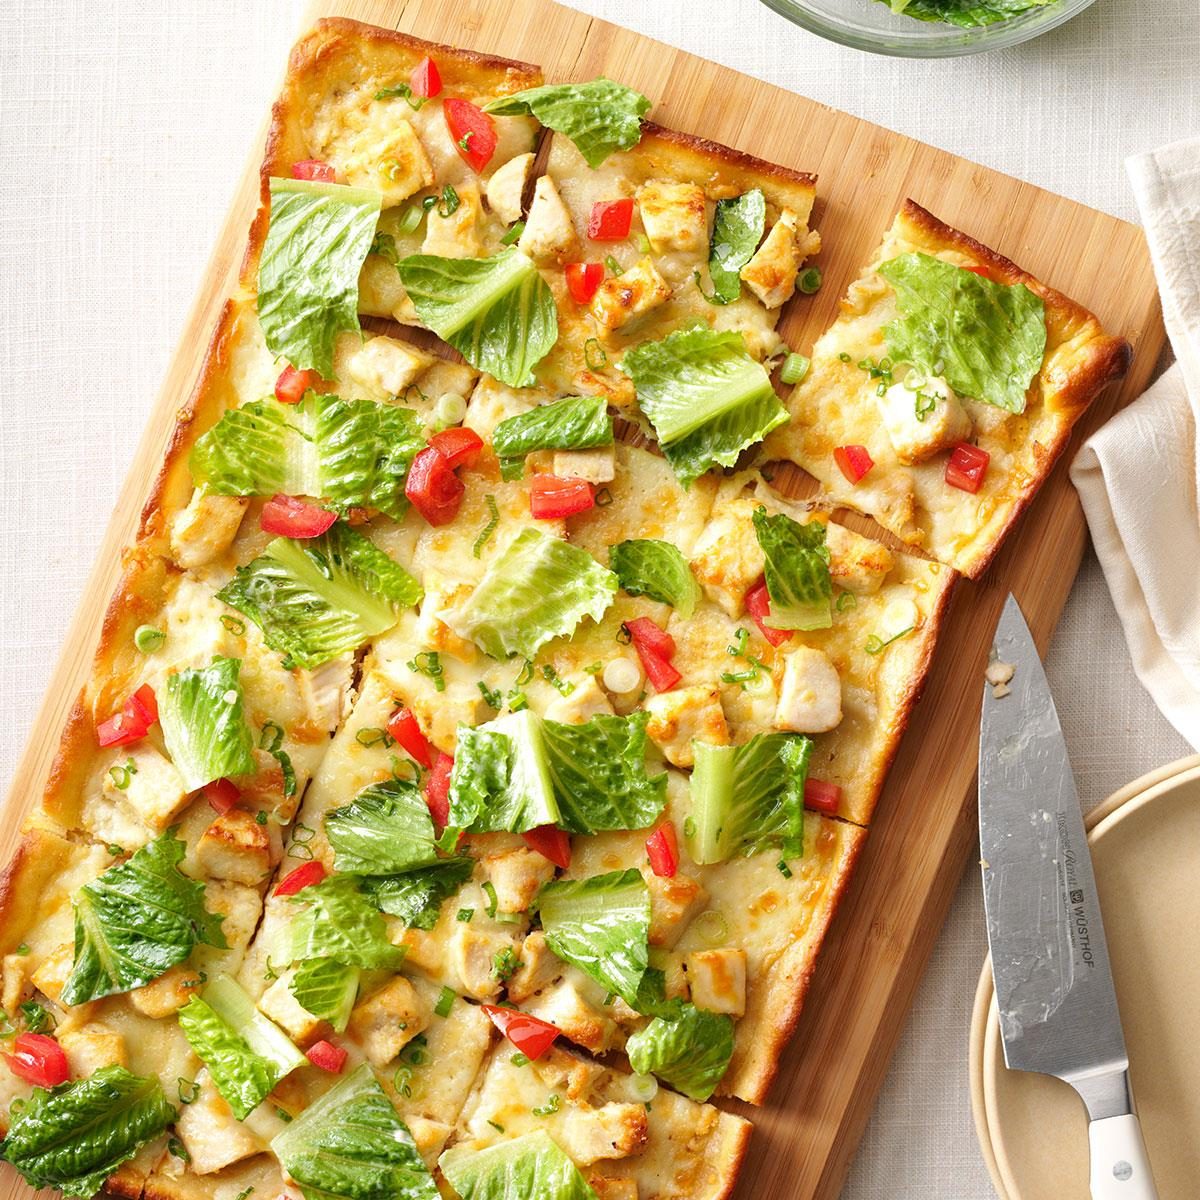 https://www.tasteofhome.com/wp-content/uploads/2018/01/Chicken-Caesar-Pizza_exps39712_SD132778B04_17_5bC_RMS.jpg?fit=700%2C1024